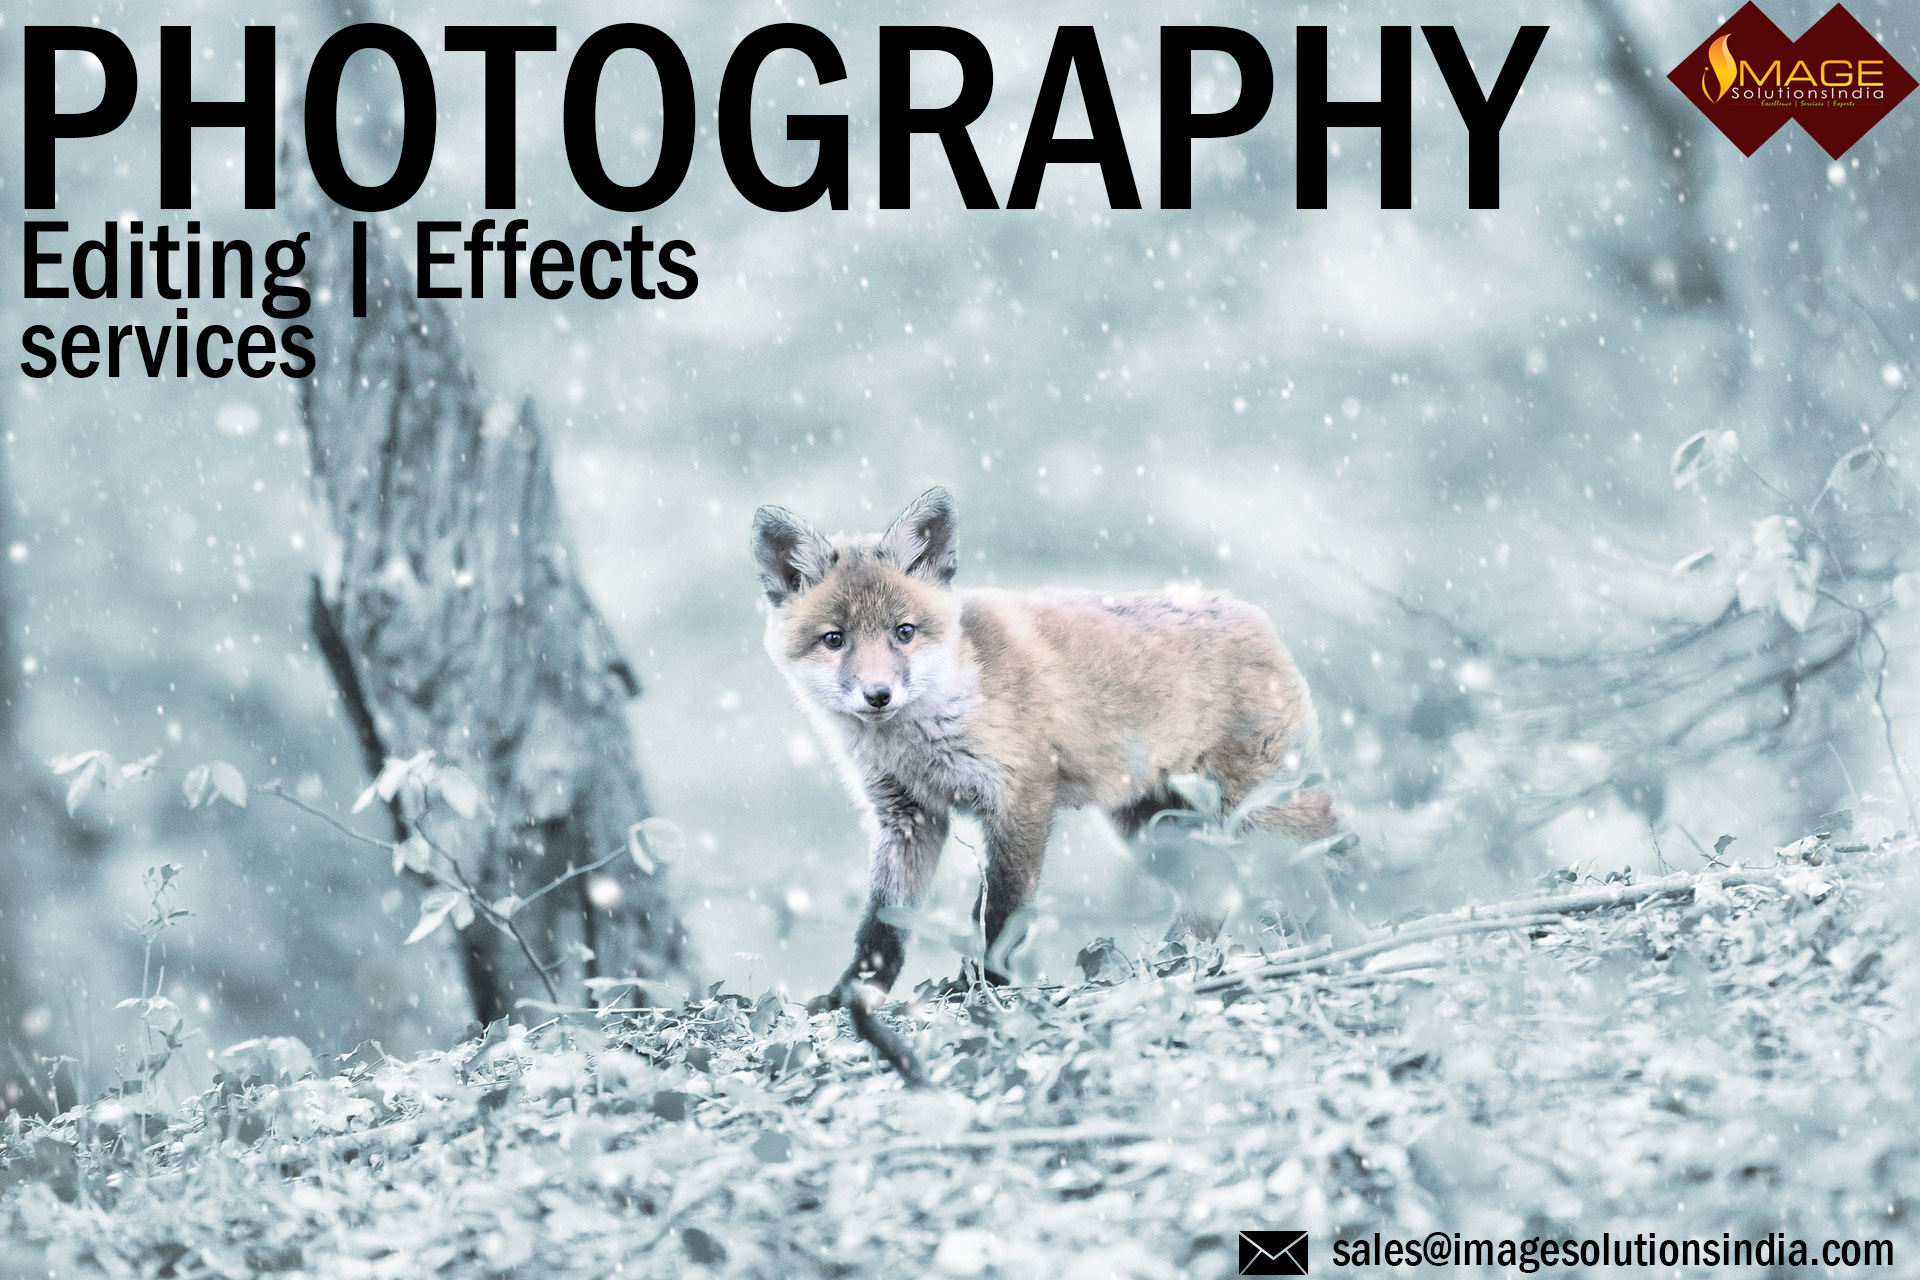 Photo Editing Effects services for Photographes